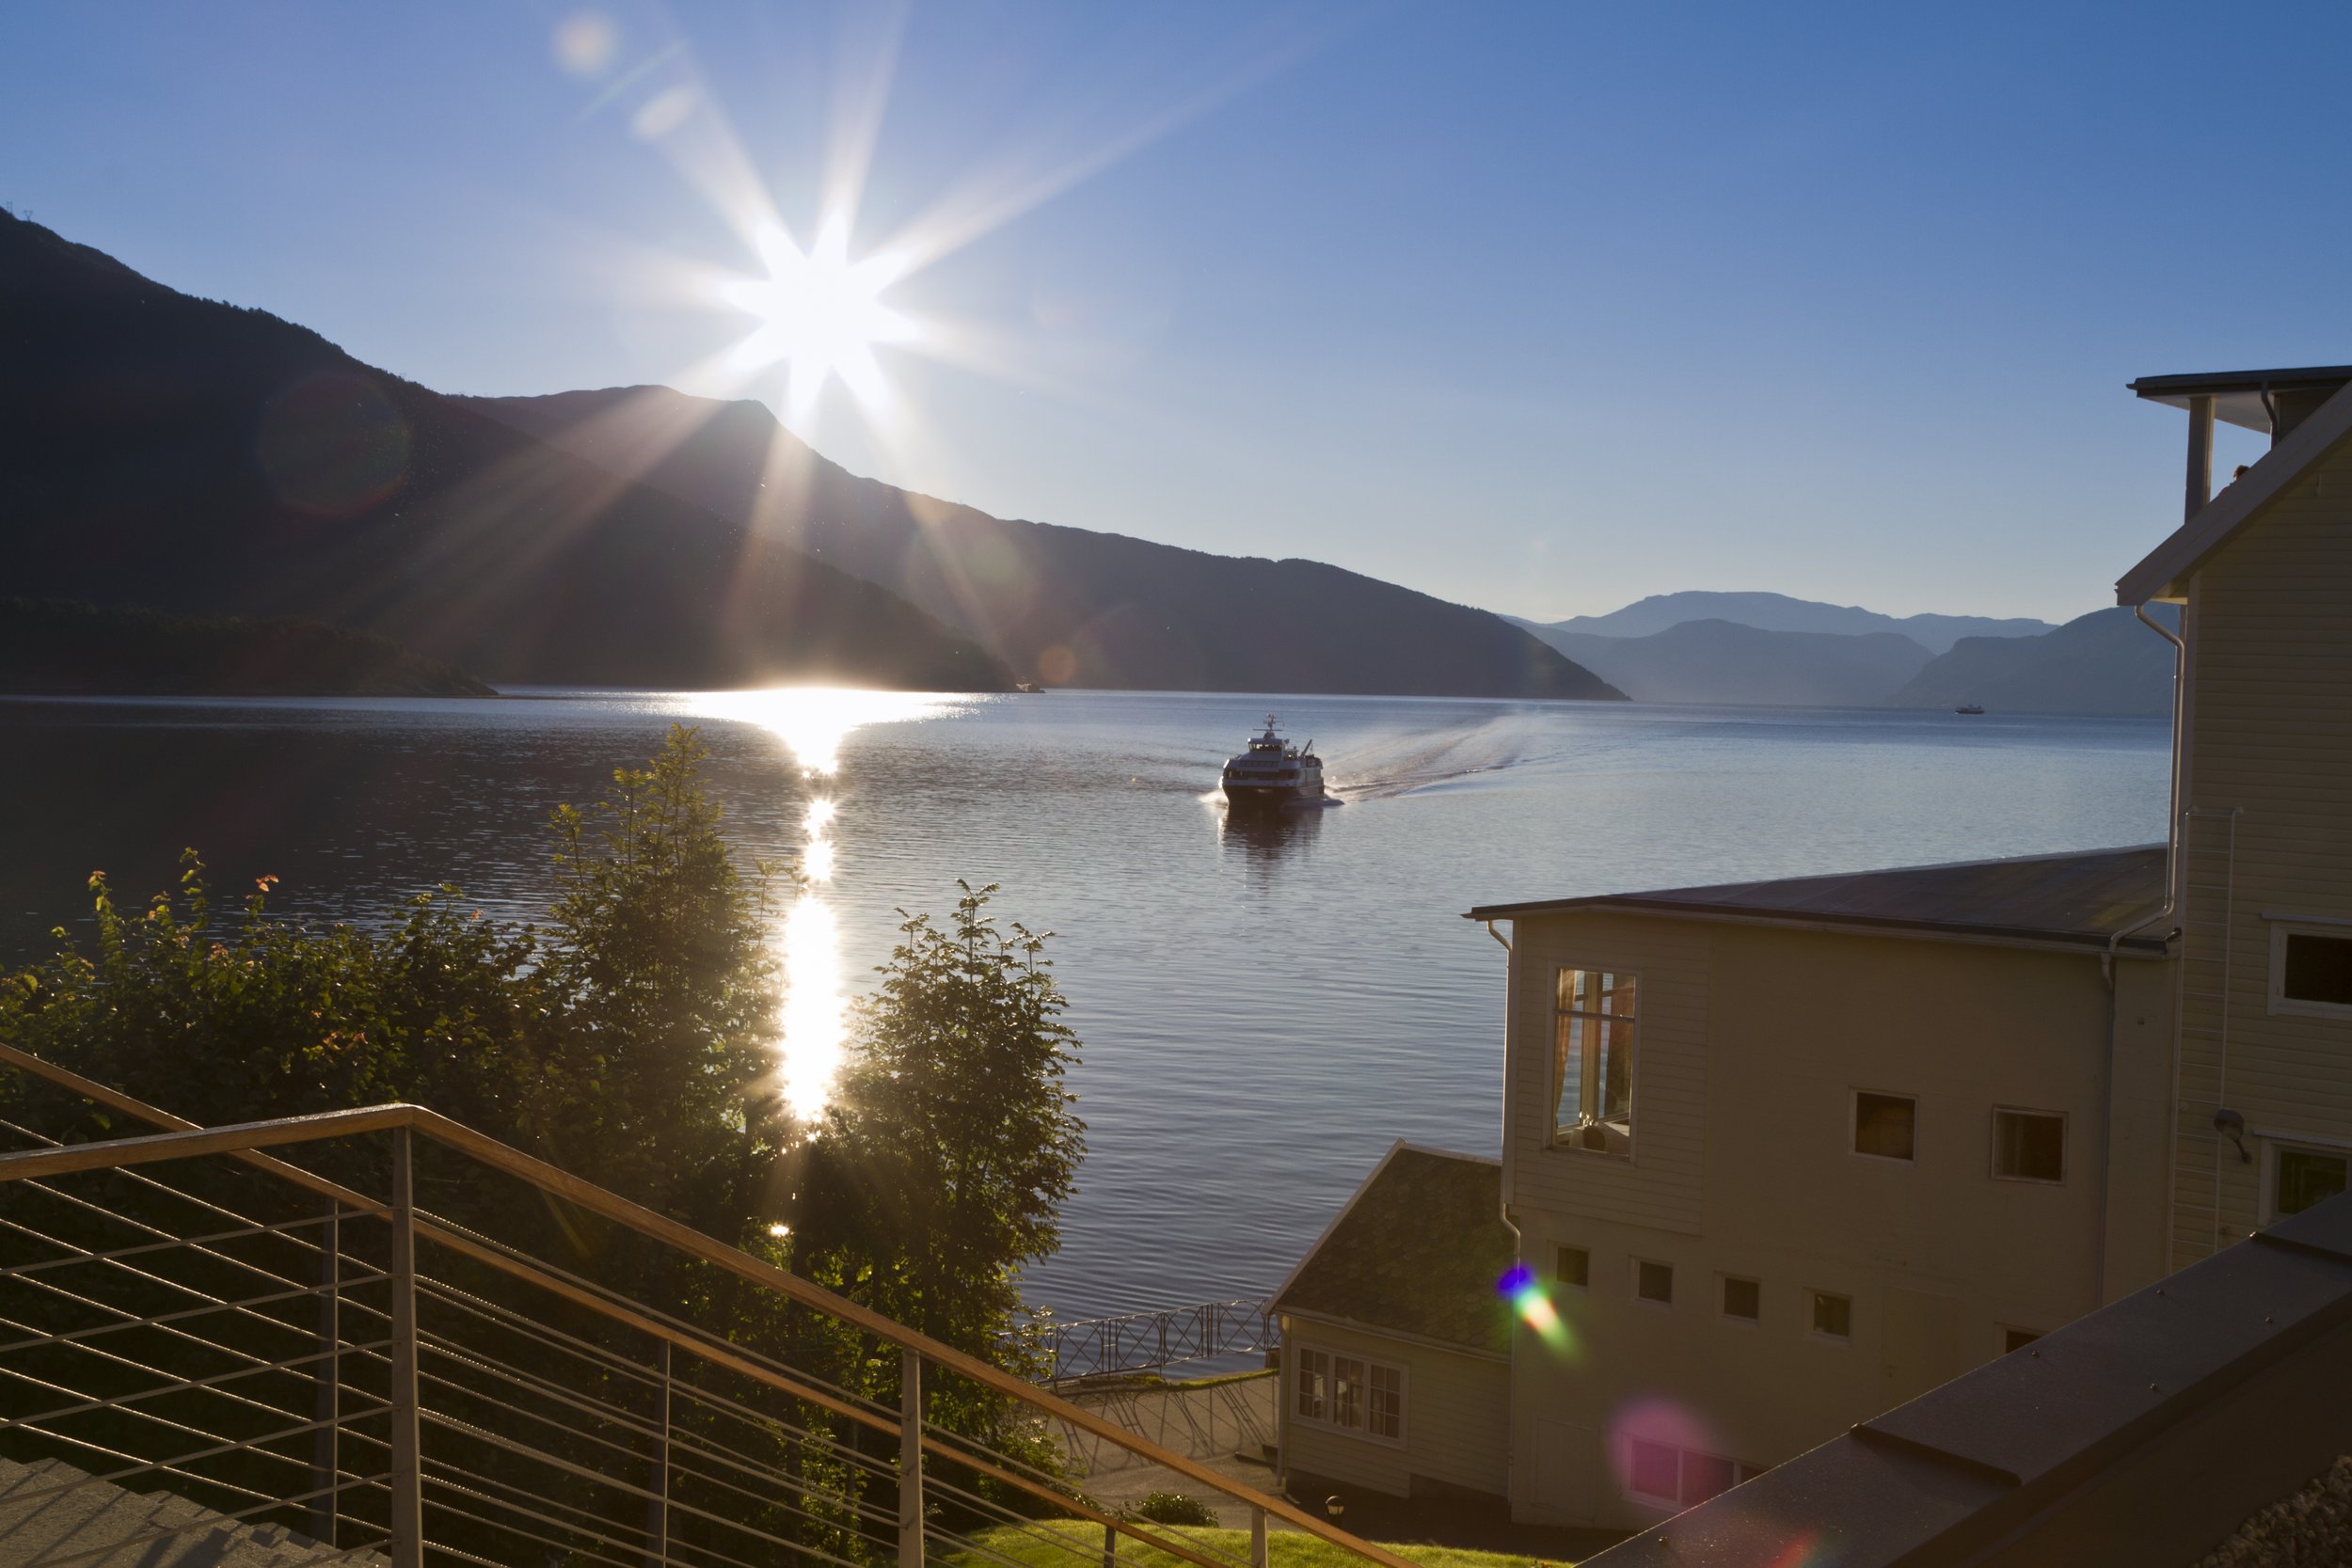 From Bergen to Balestrand? The season for boat trips is here 